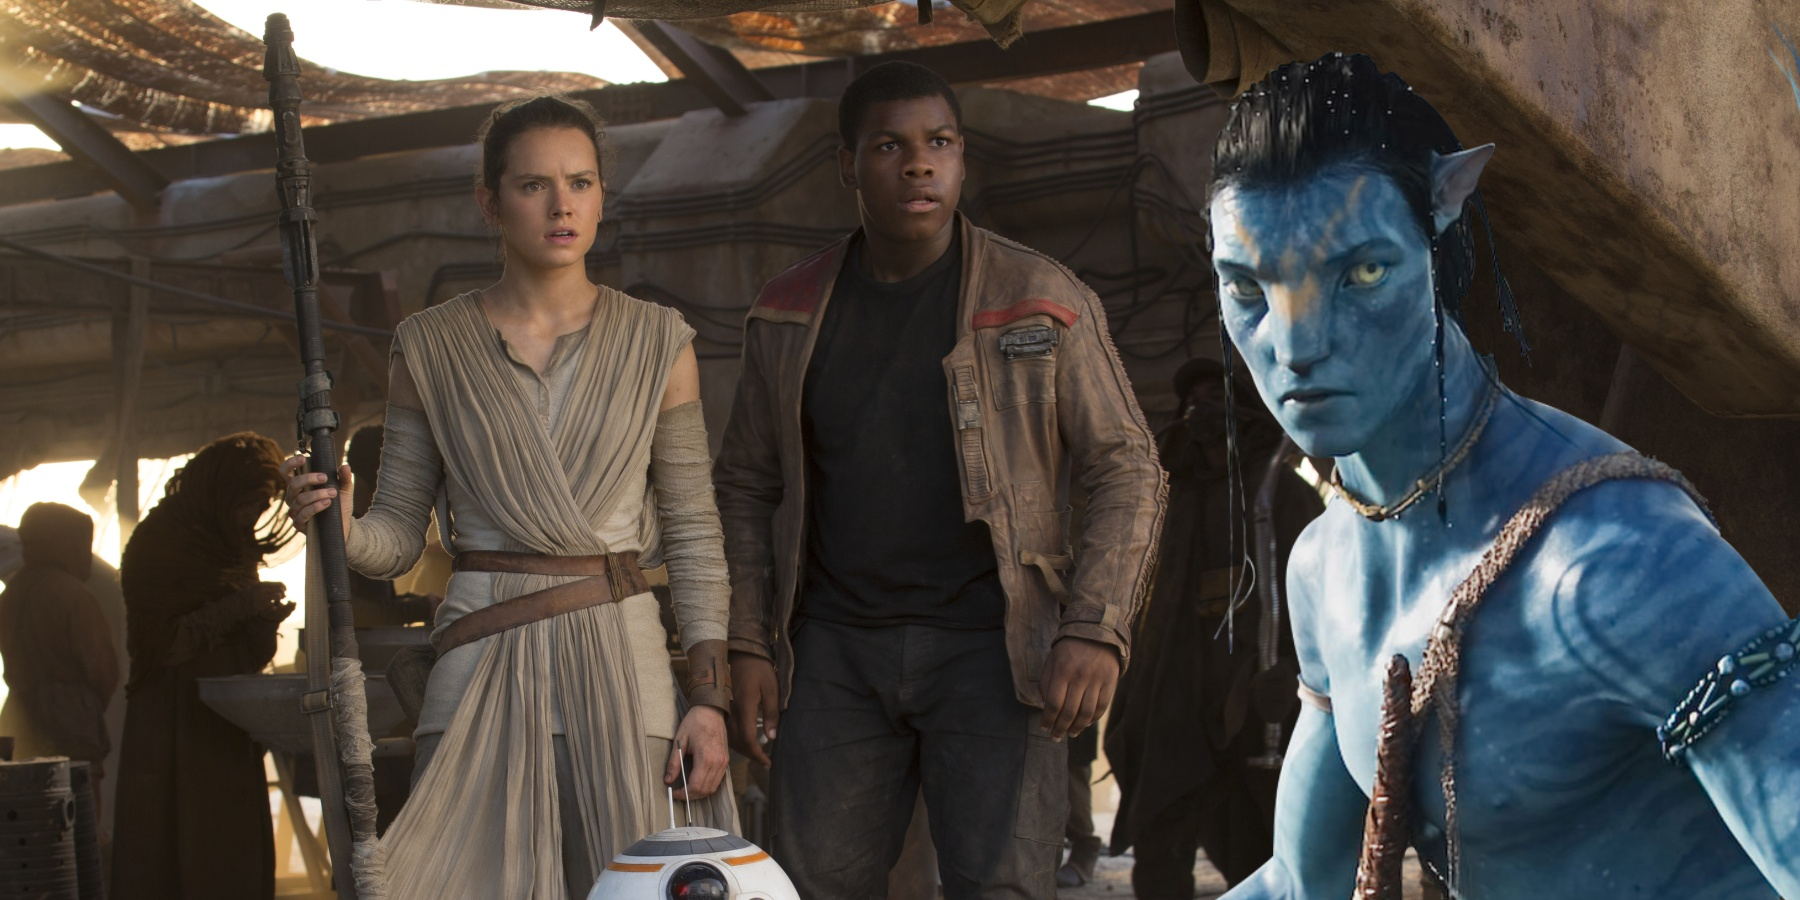 Avatar: The Way of Water Star Wars: The Force Awakens